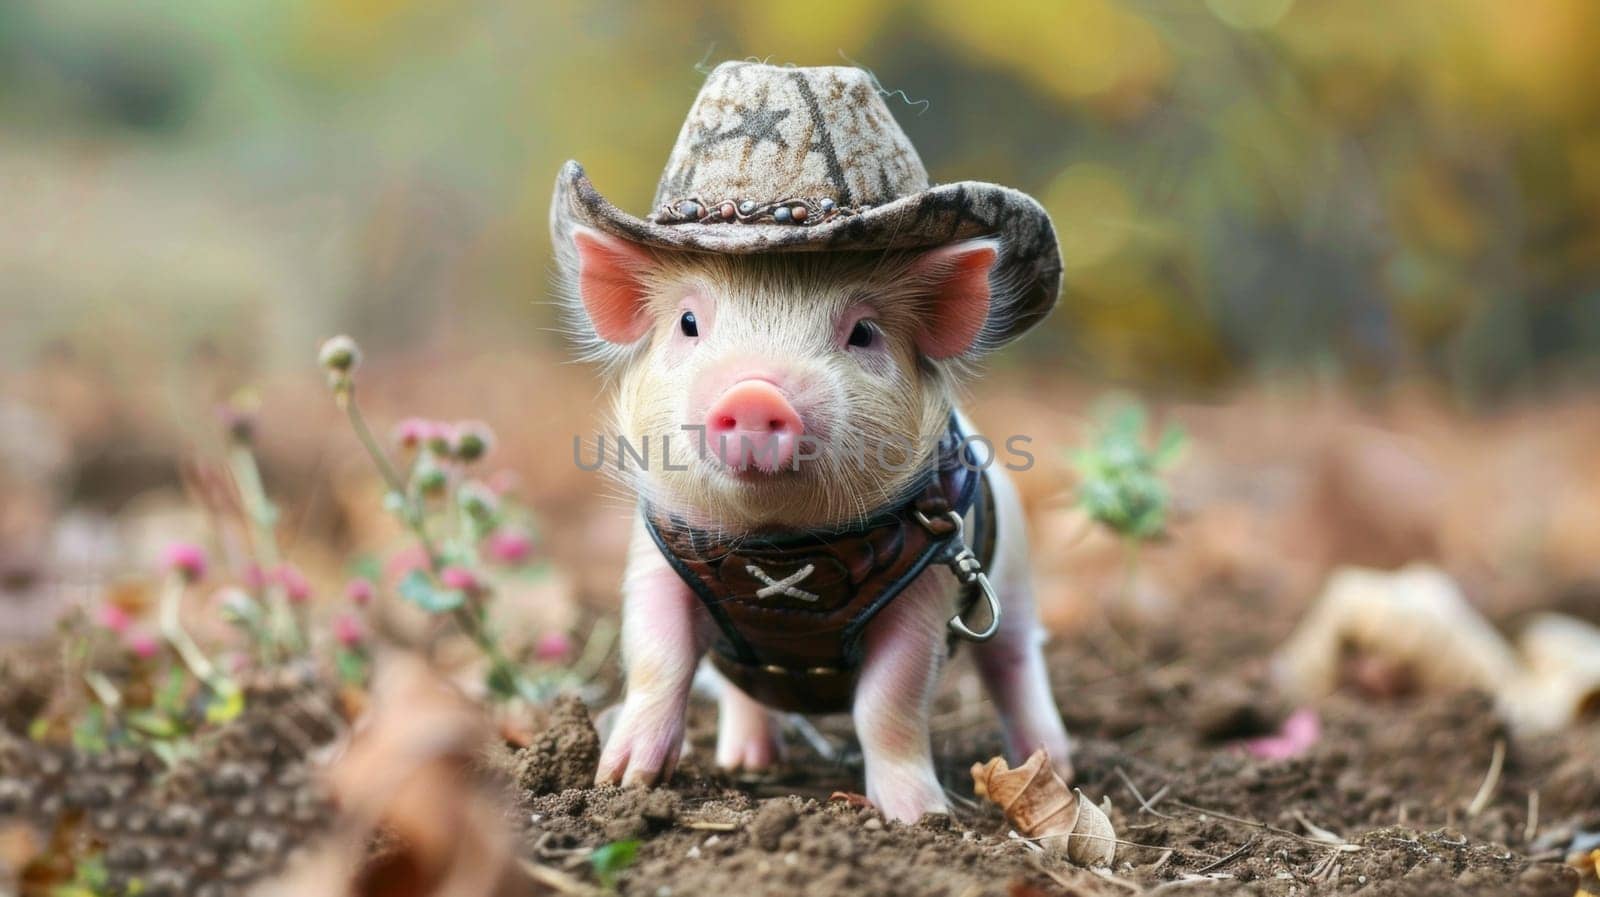 A small pig wearing a cowboy hat and riding on the ground, AI by starush